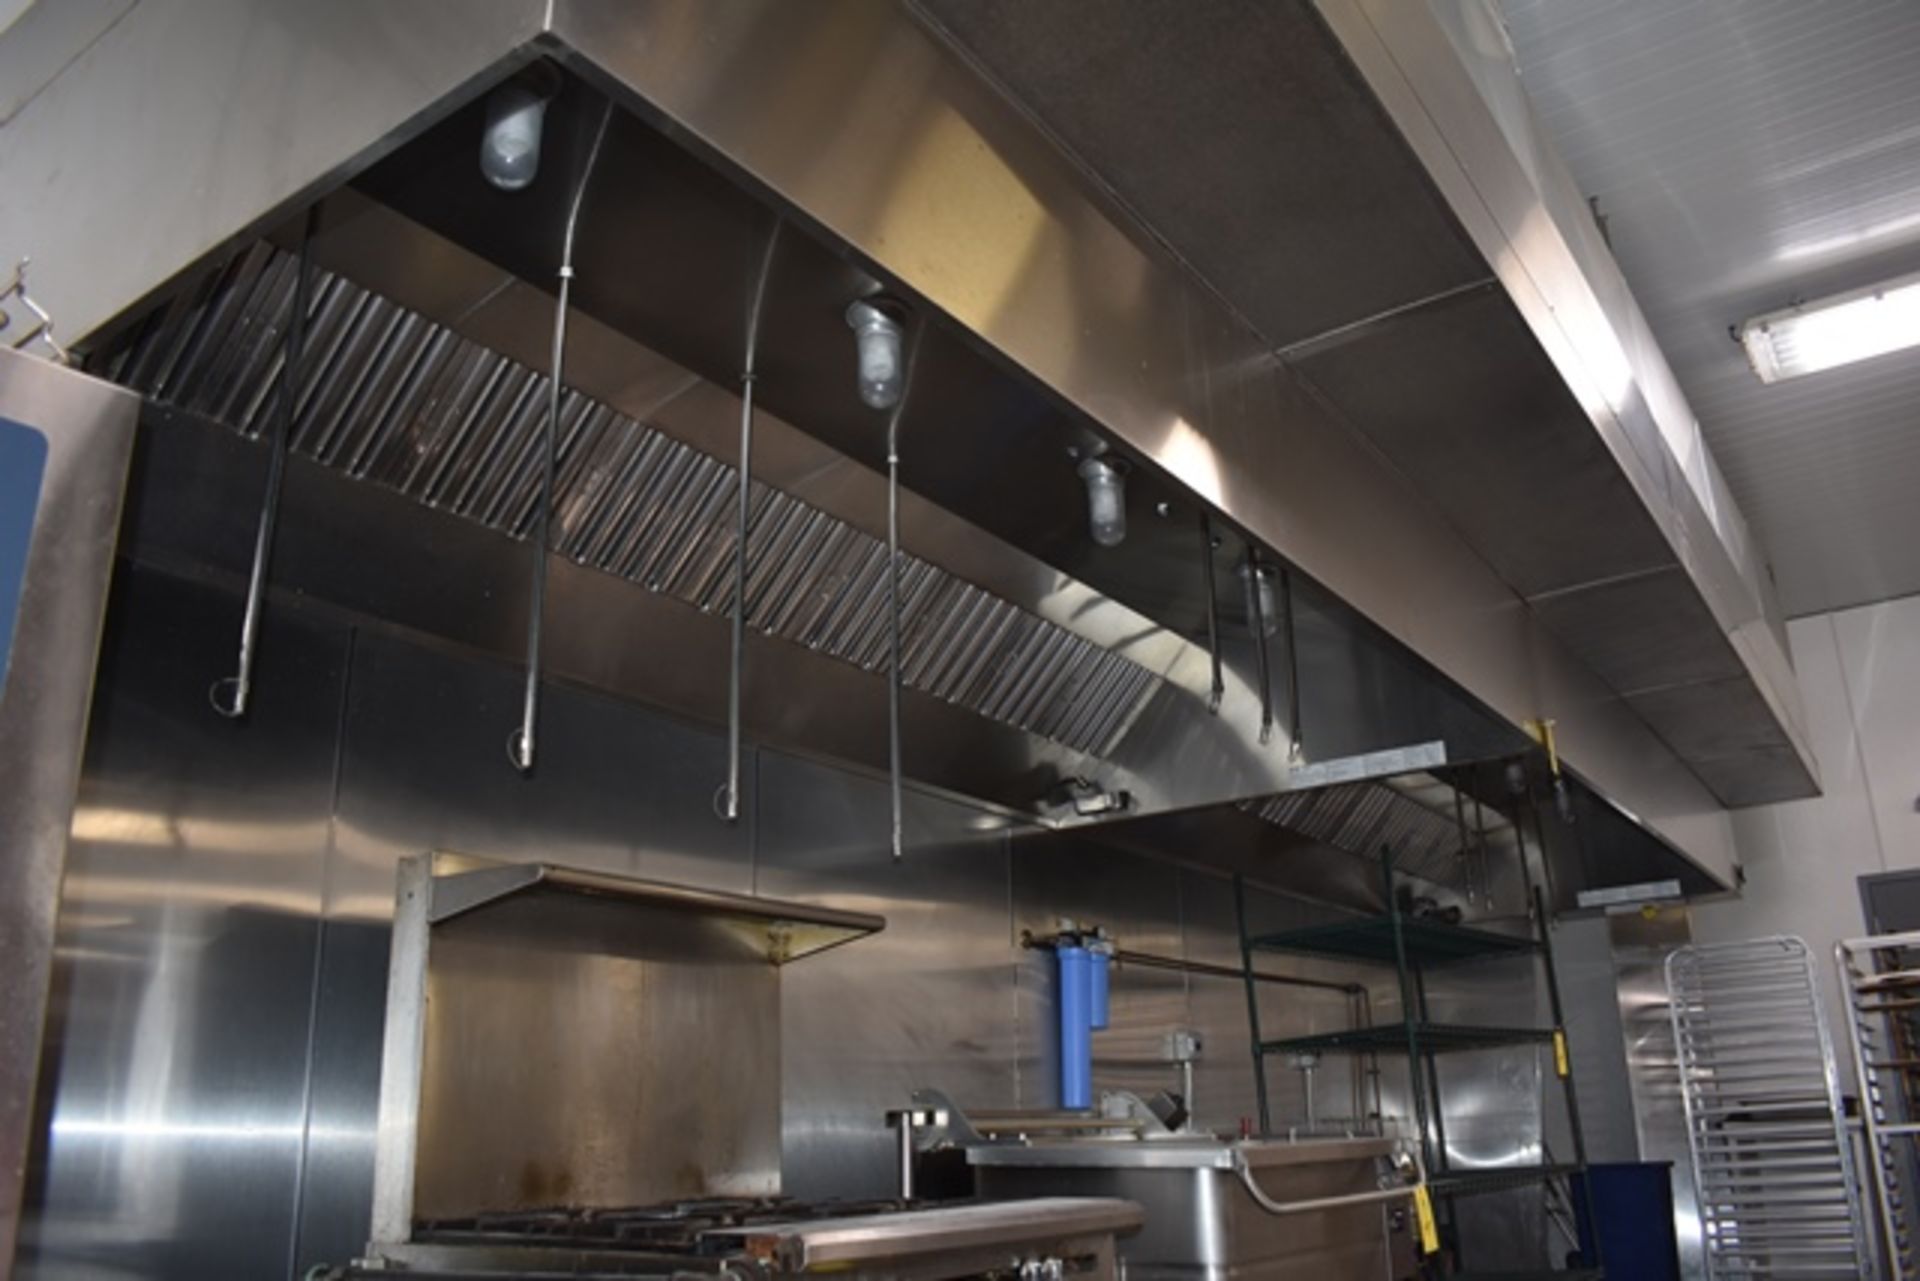 2-Sections Captiveaire SS Hood, #6624ND-2, Exhaust Hood w/o Exhaust Fan, Each Section 12' Length